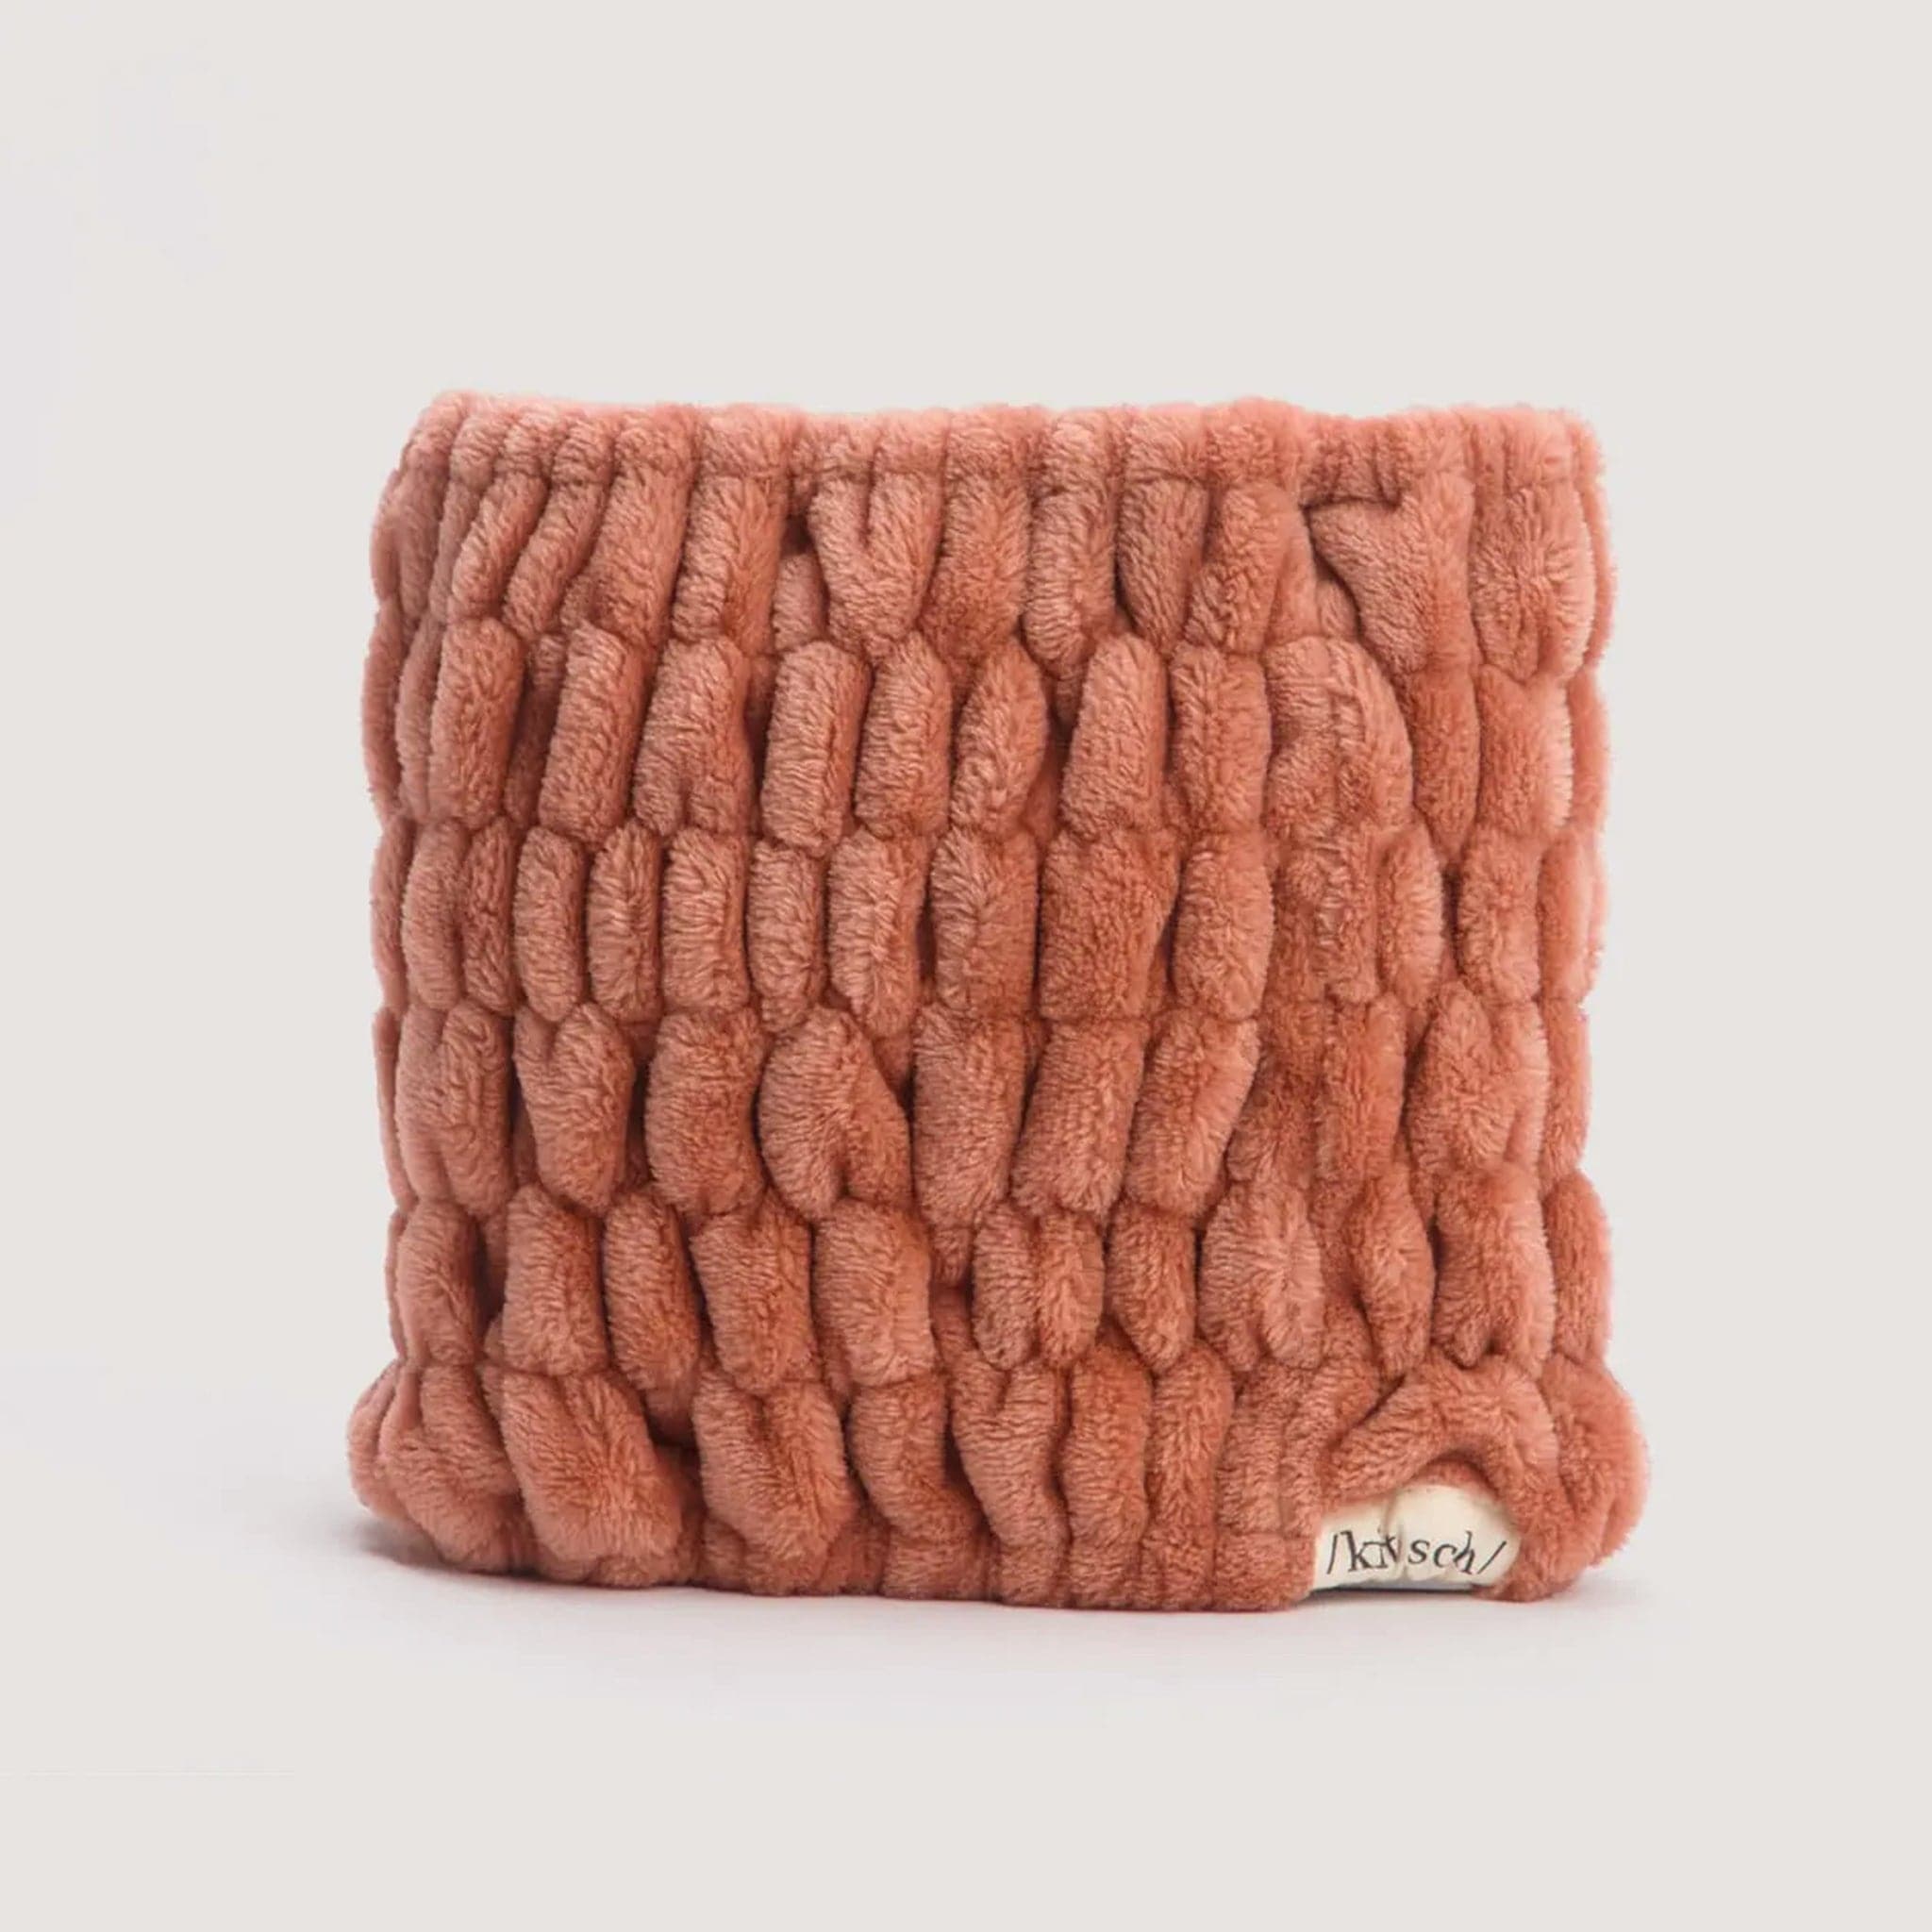 Velvety soft, pale coral headband with a scrunched texture throughout. A small 'Kitch' label is stitched in the bottom right corner of the headband. 